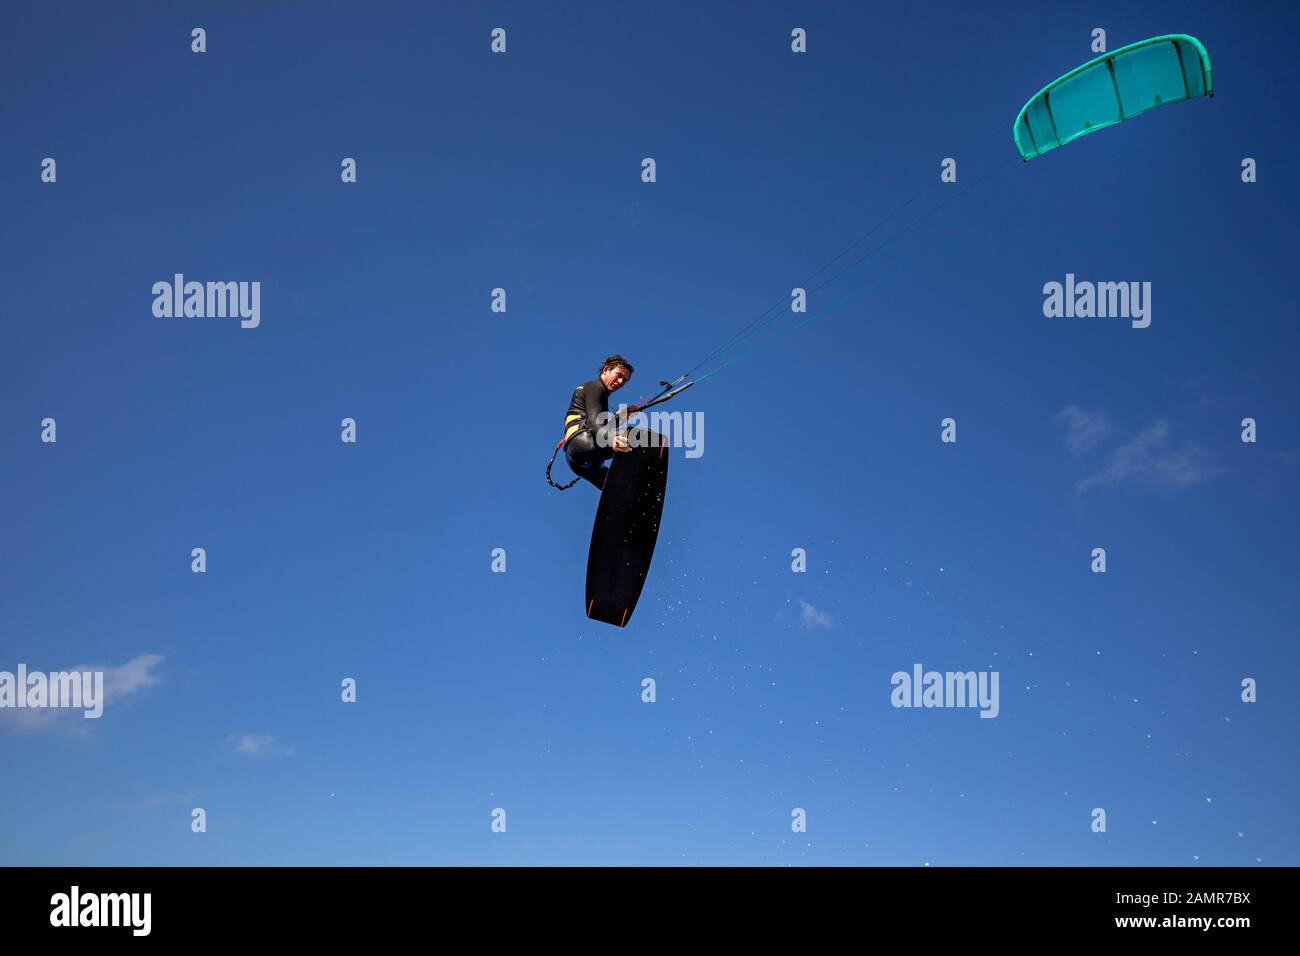 Sporty Kitesurfer having fun in the air during a jump. Updraft with board grab. Stock Photo